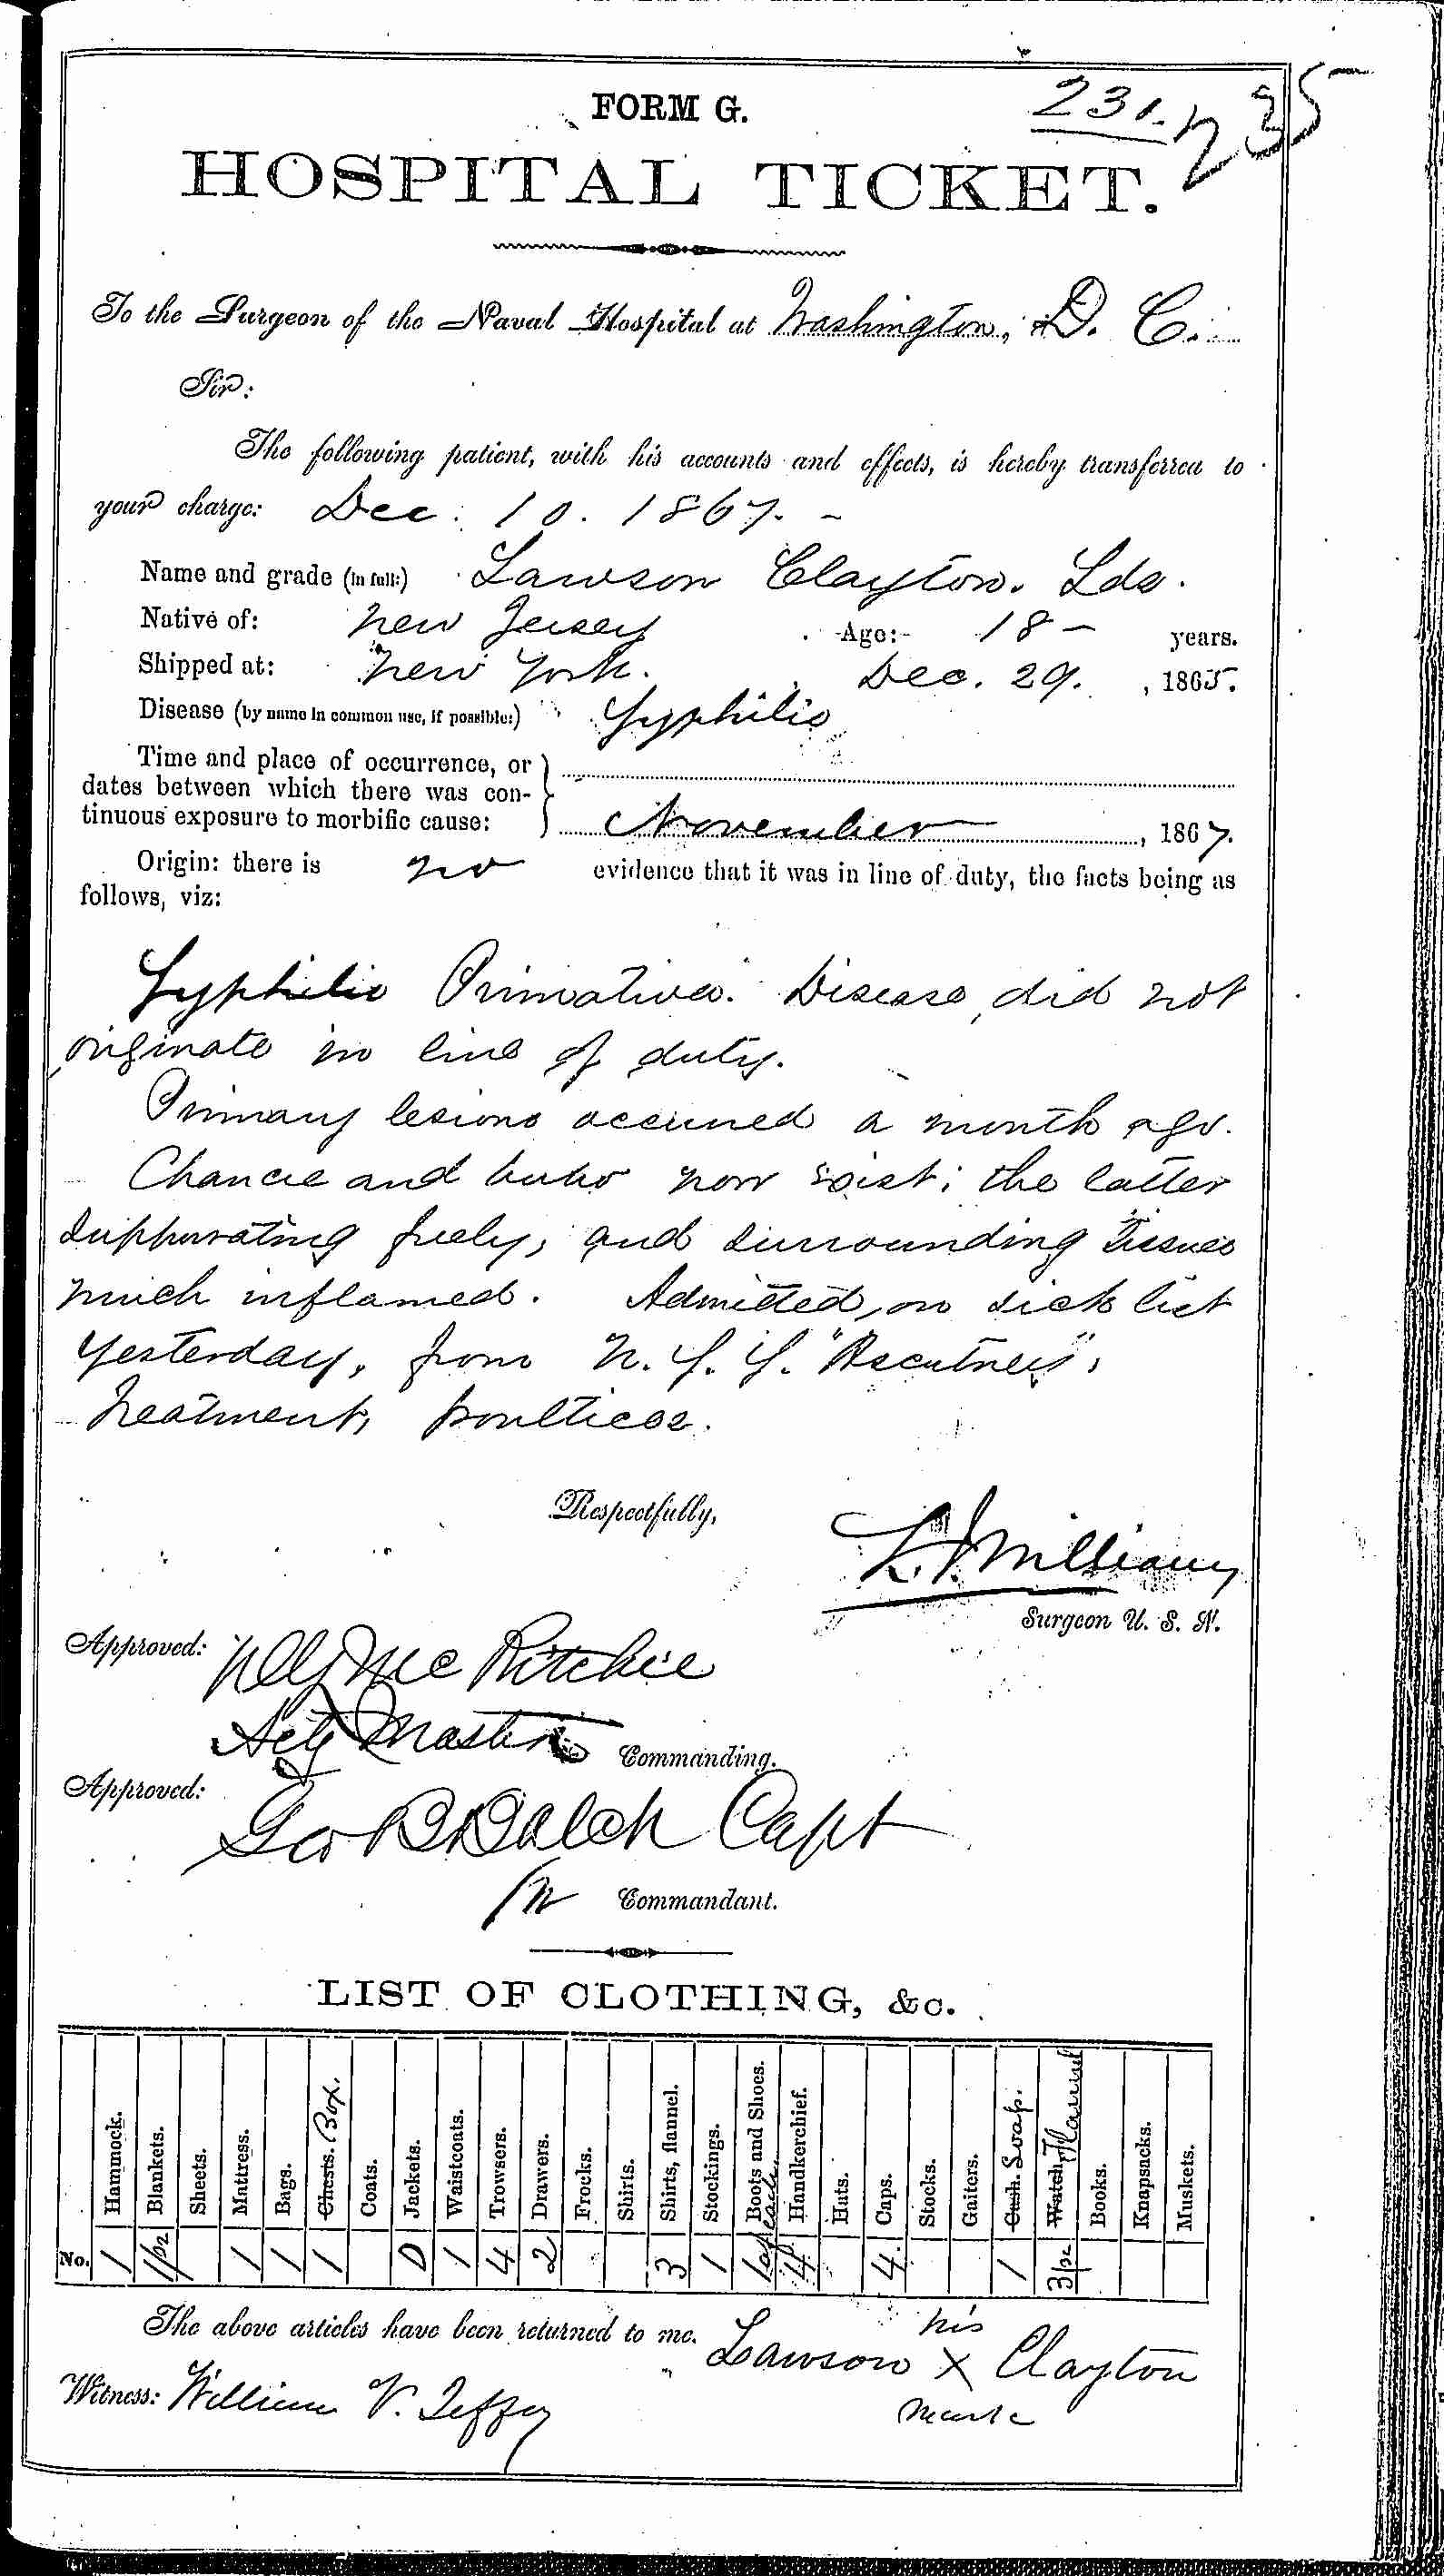 Entry for Lawson Clayton (page 1 of 2) in the log Hospital Tickets and Case Papers - Naval Hospital - Washington, D.C. - 1866-68